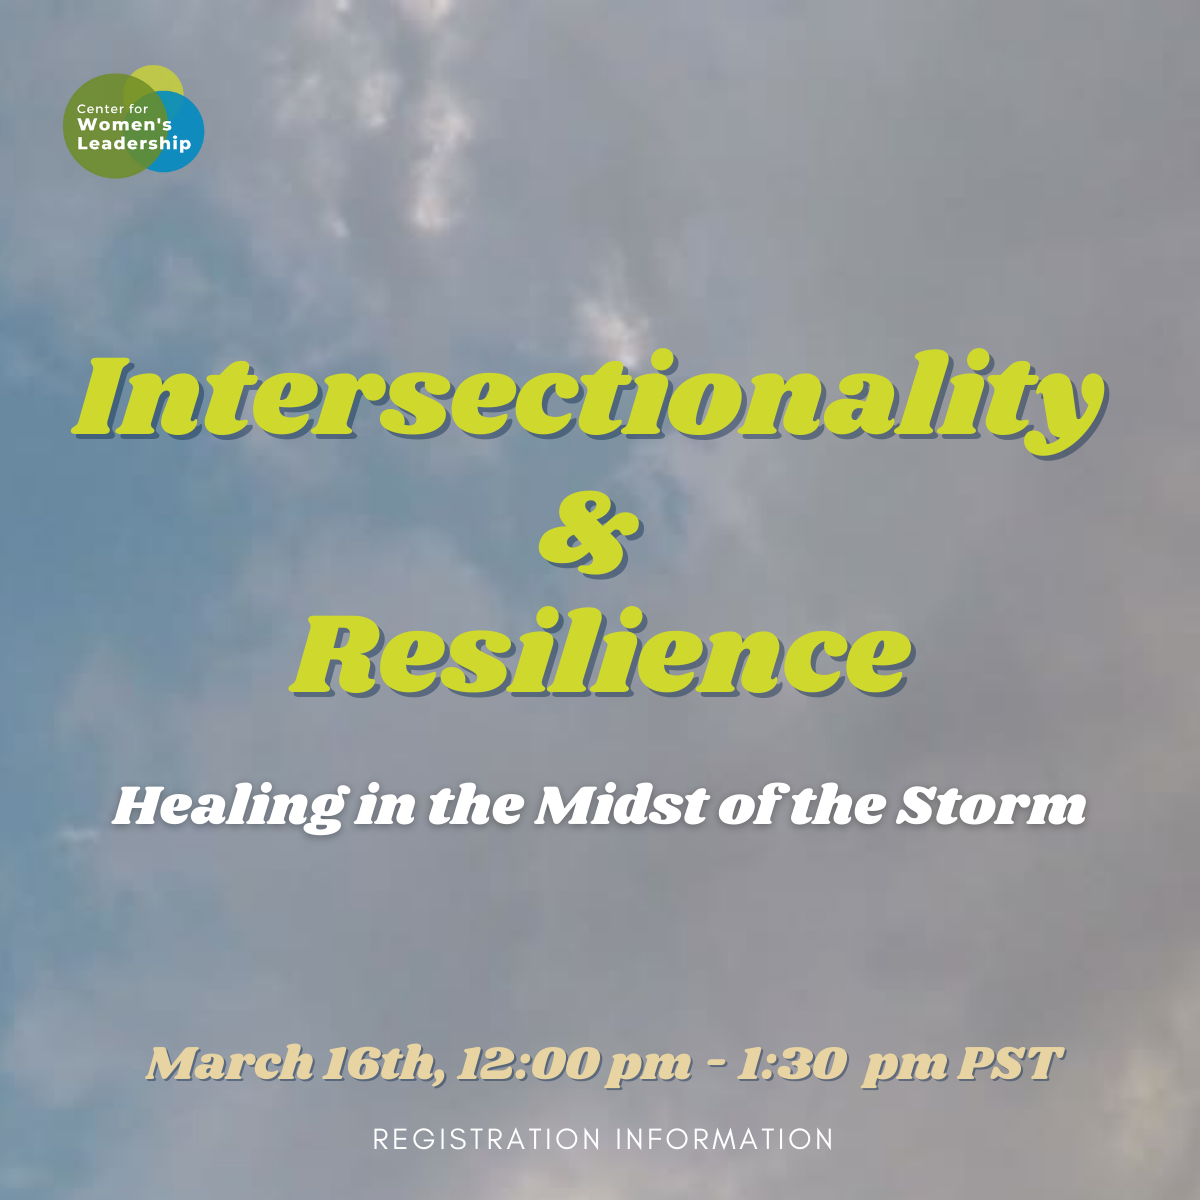 The background is the sky with grey and white clouds and a blue sky. The text reads Intersectionality & resilience healing in the midst of the storm